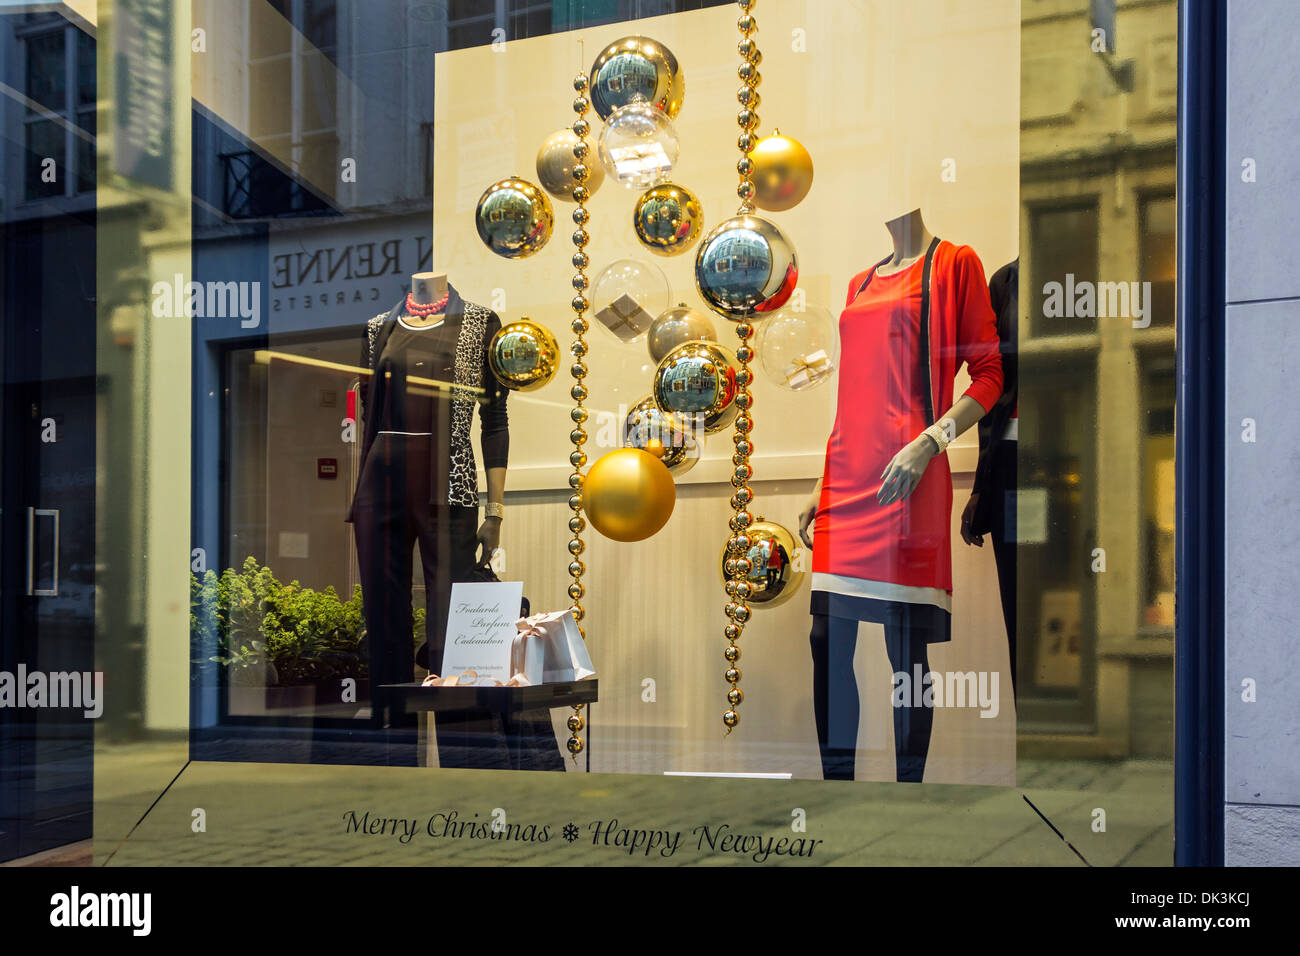 Creative shop decoration for christmas ideas to attract customers